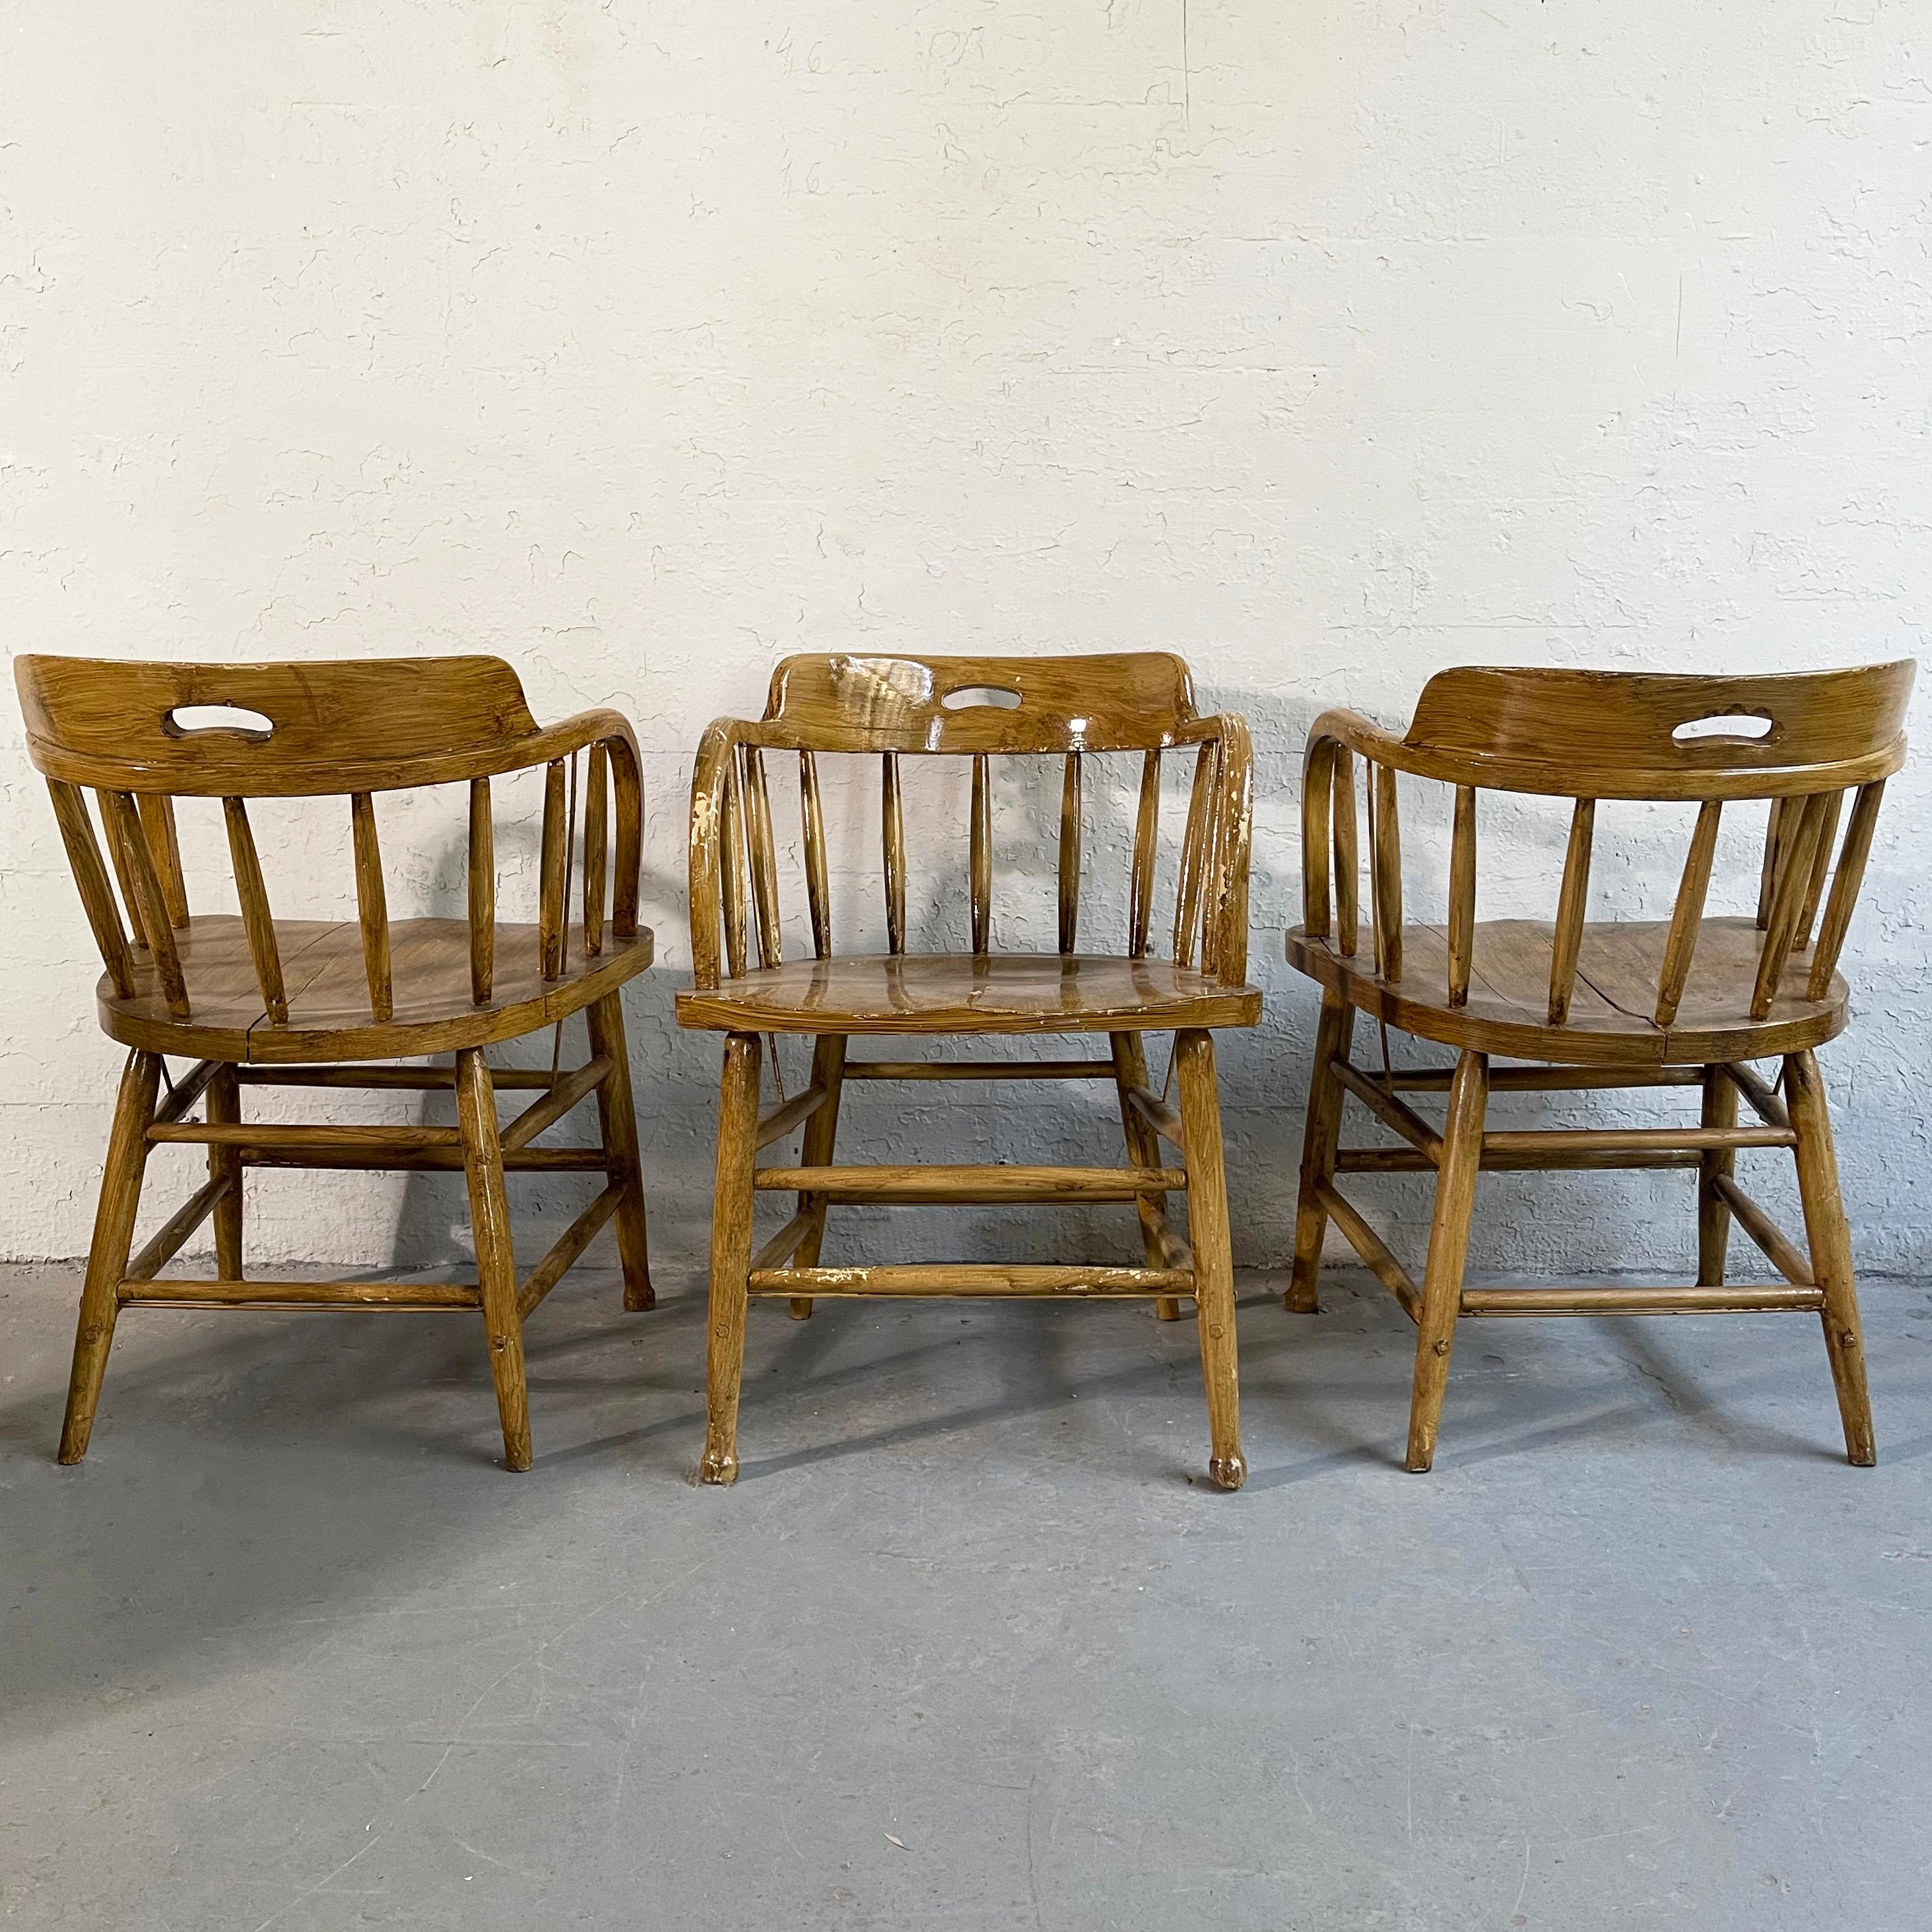 Early 20th Century, Rustic Oak Firehouse Dining Chairs 1